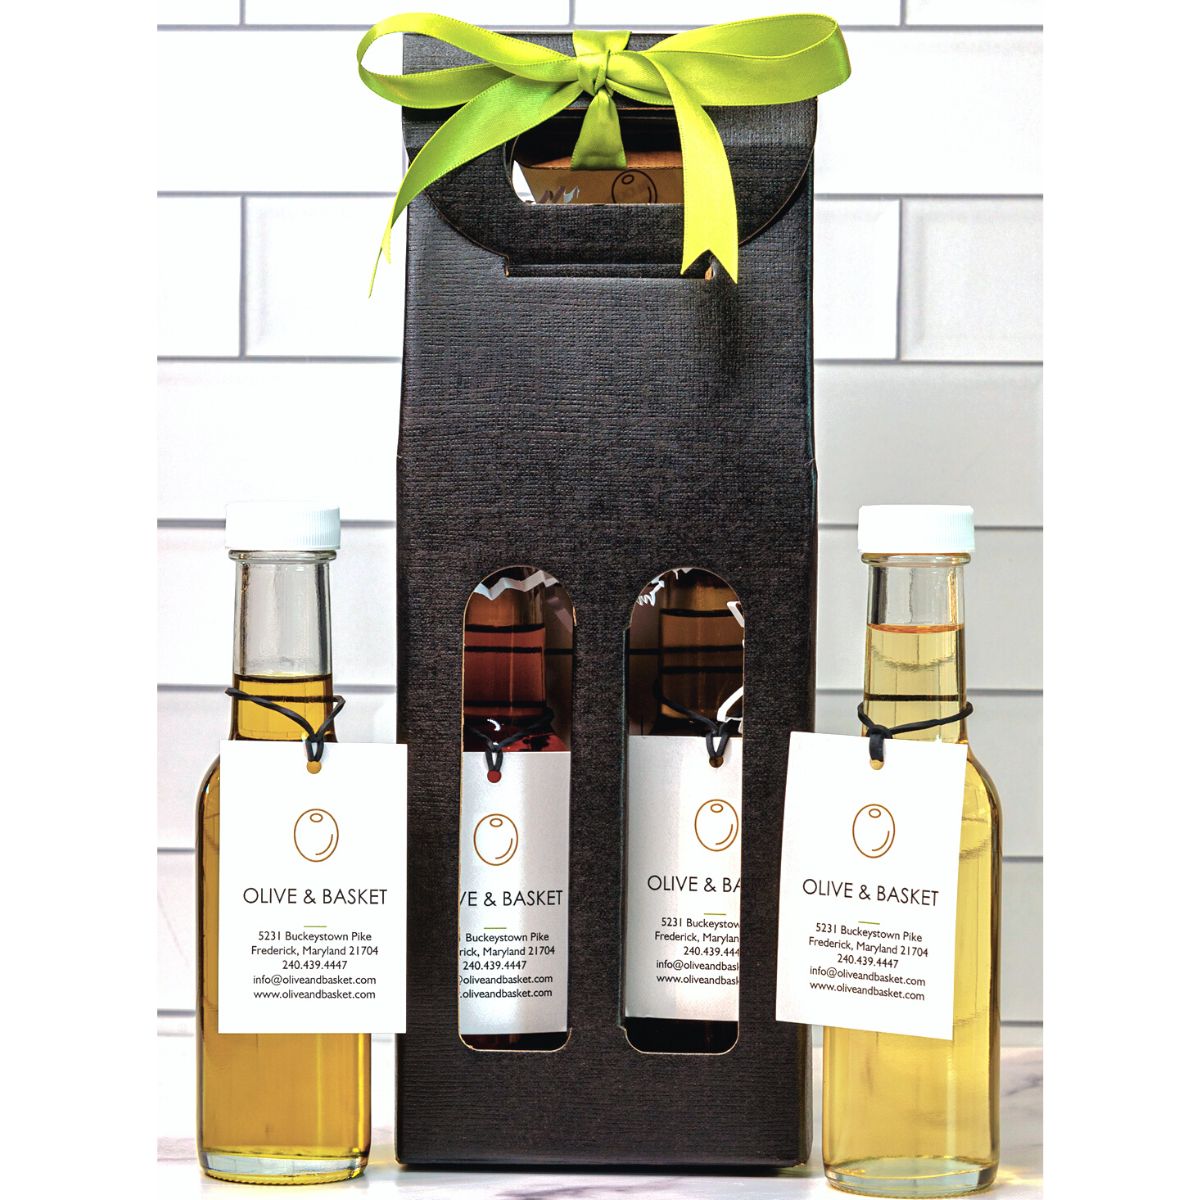 Fresh and Robust Duo Gift Box- Includes Marc de Champagne Vinegar and Garlic Olive Oil in a Gift Box